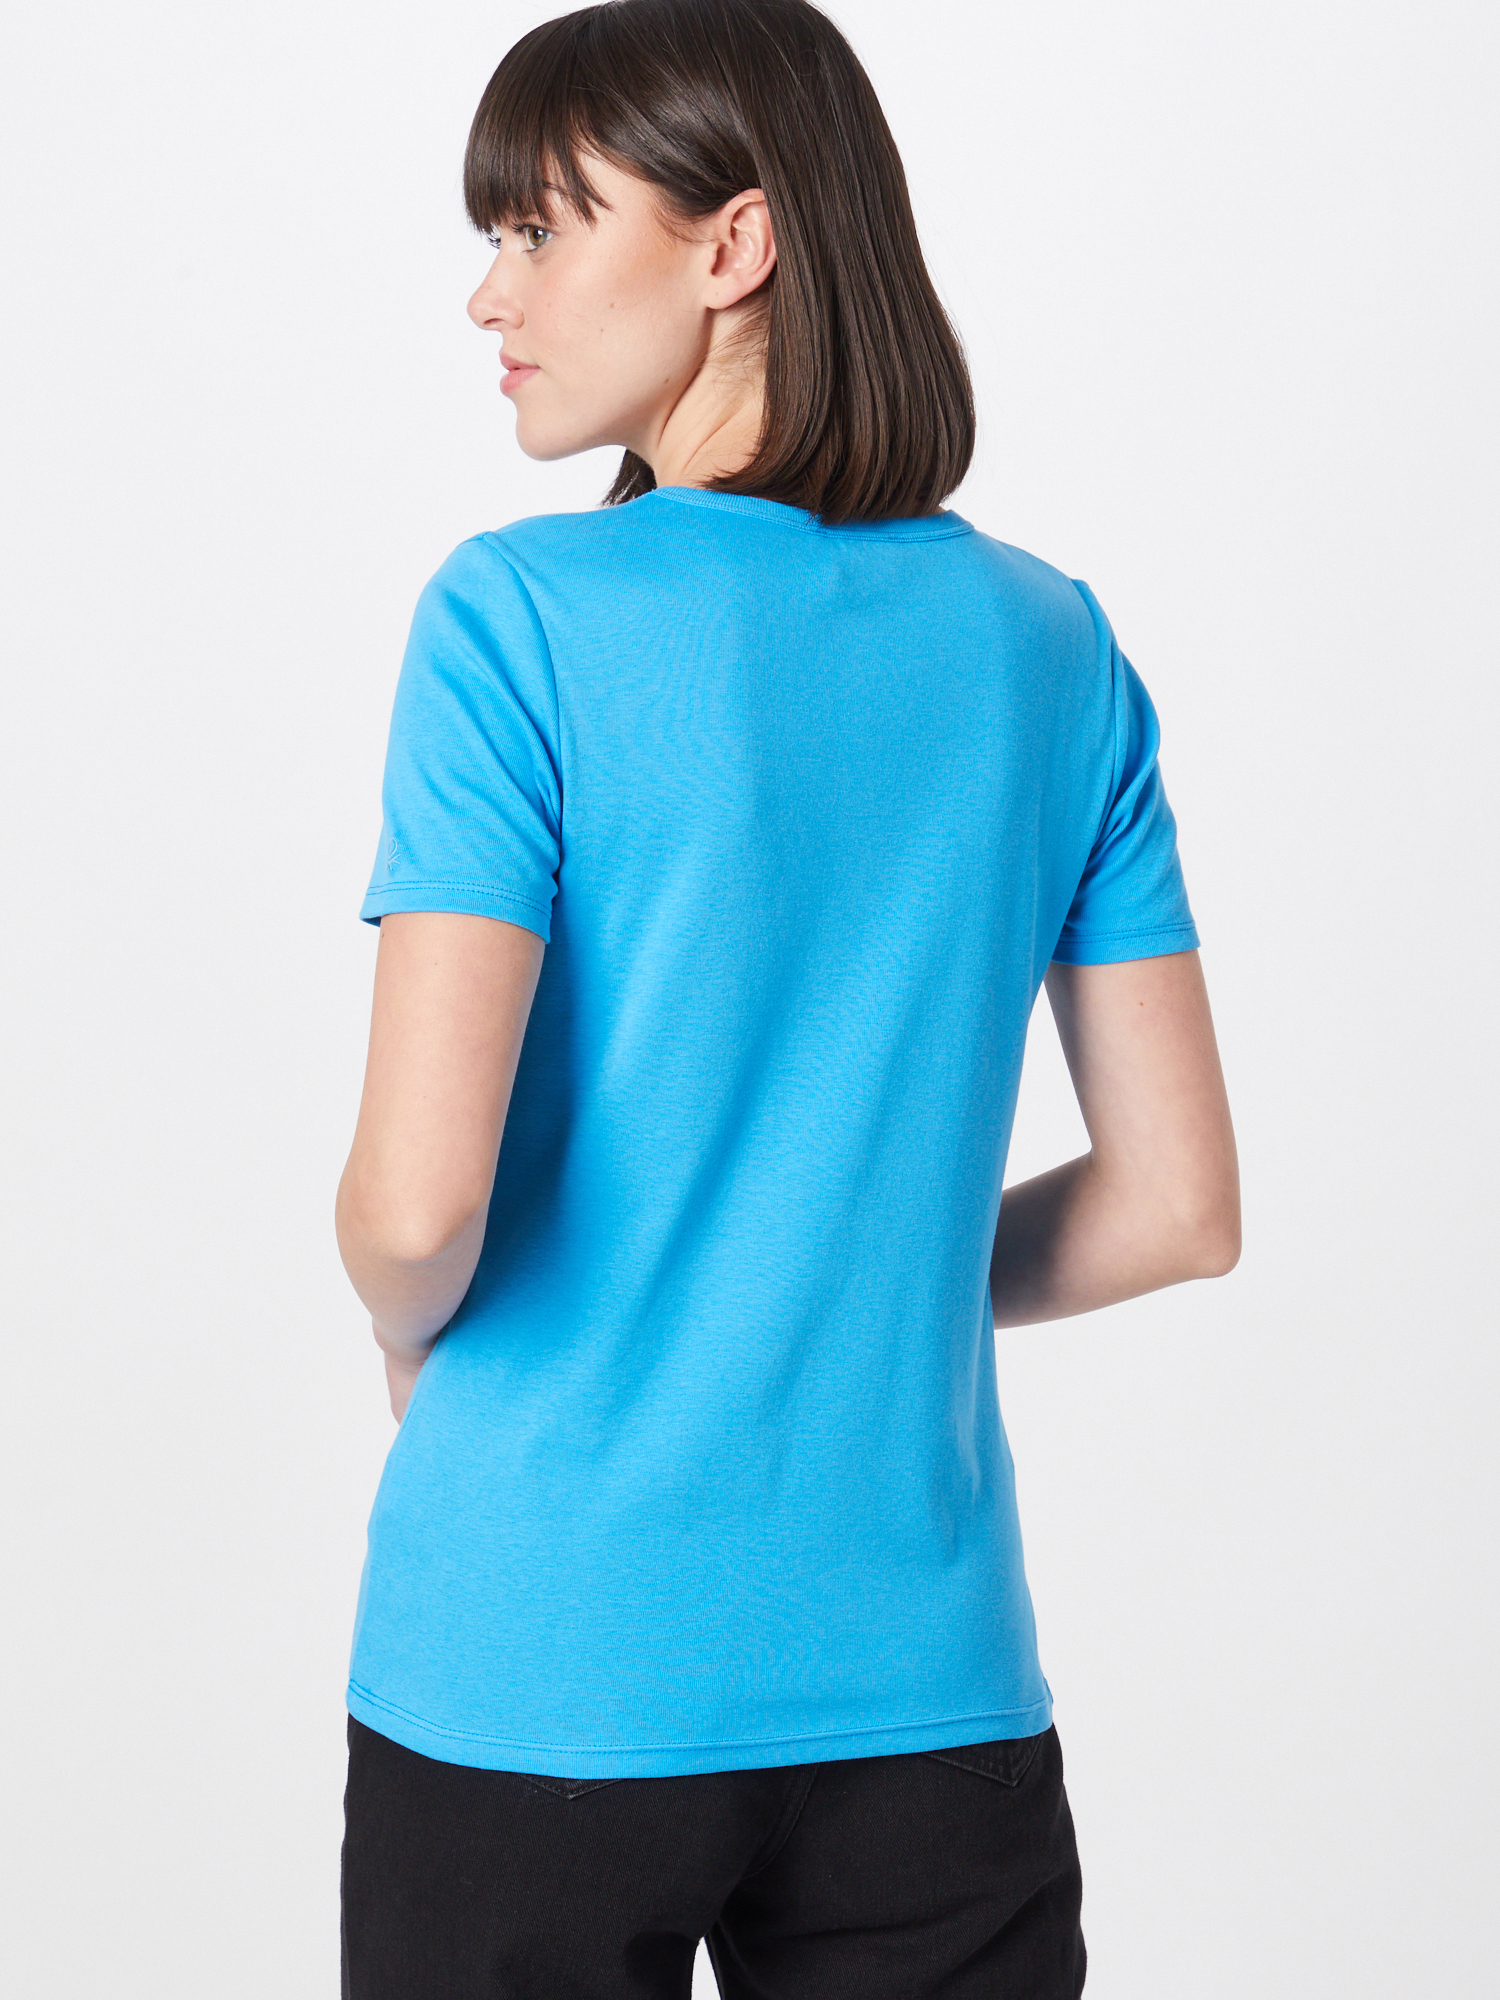 UNITED COLORS OF BENETTON T-Shirt in Himmelblau 